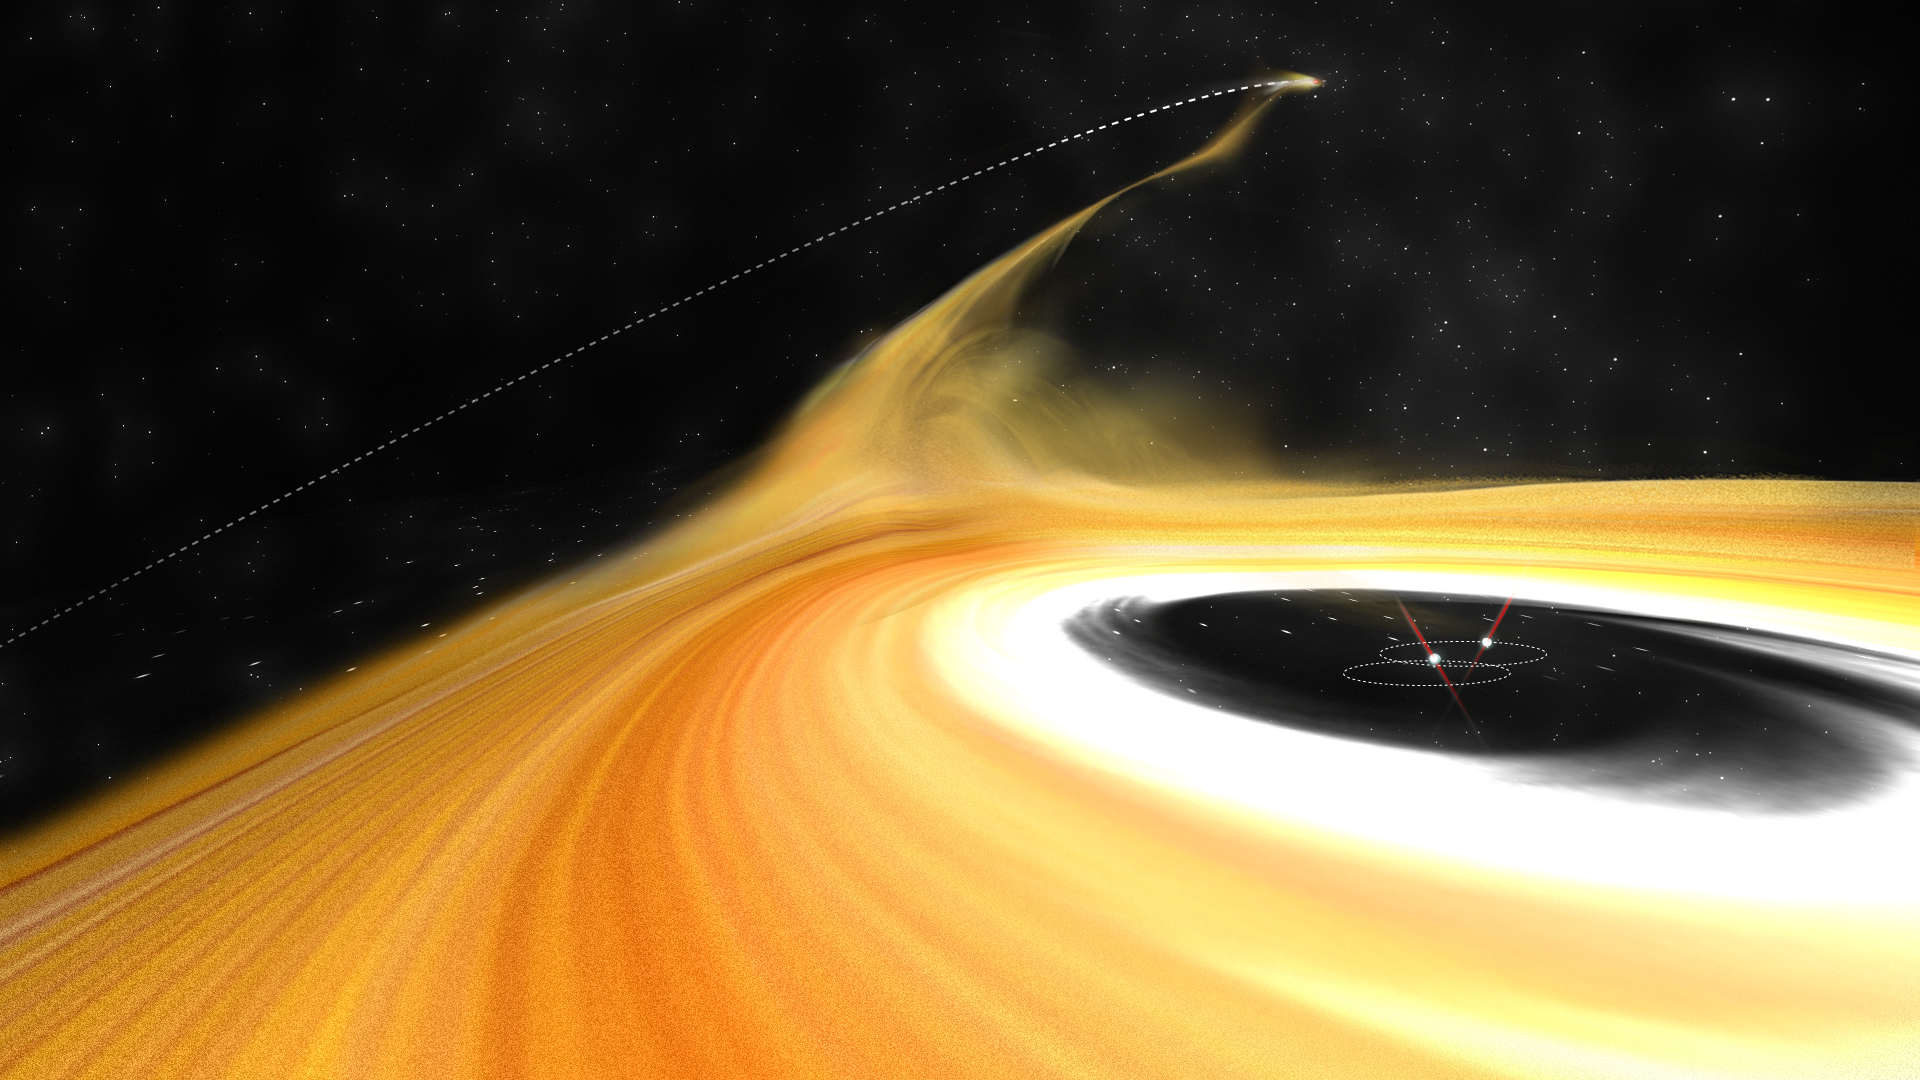 Artist's impression of the intruder star as it passed through the Z Canis Majoris star system and disrupted the protoplanetary disc. Credit: ALMA (ESO/NAOJ/NRAO), B. Saxton (NRAO/AUI/NSF)